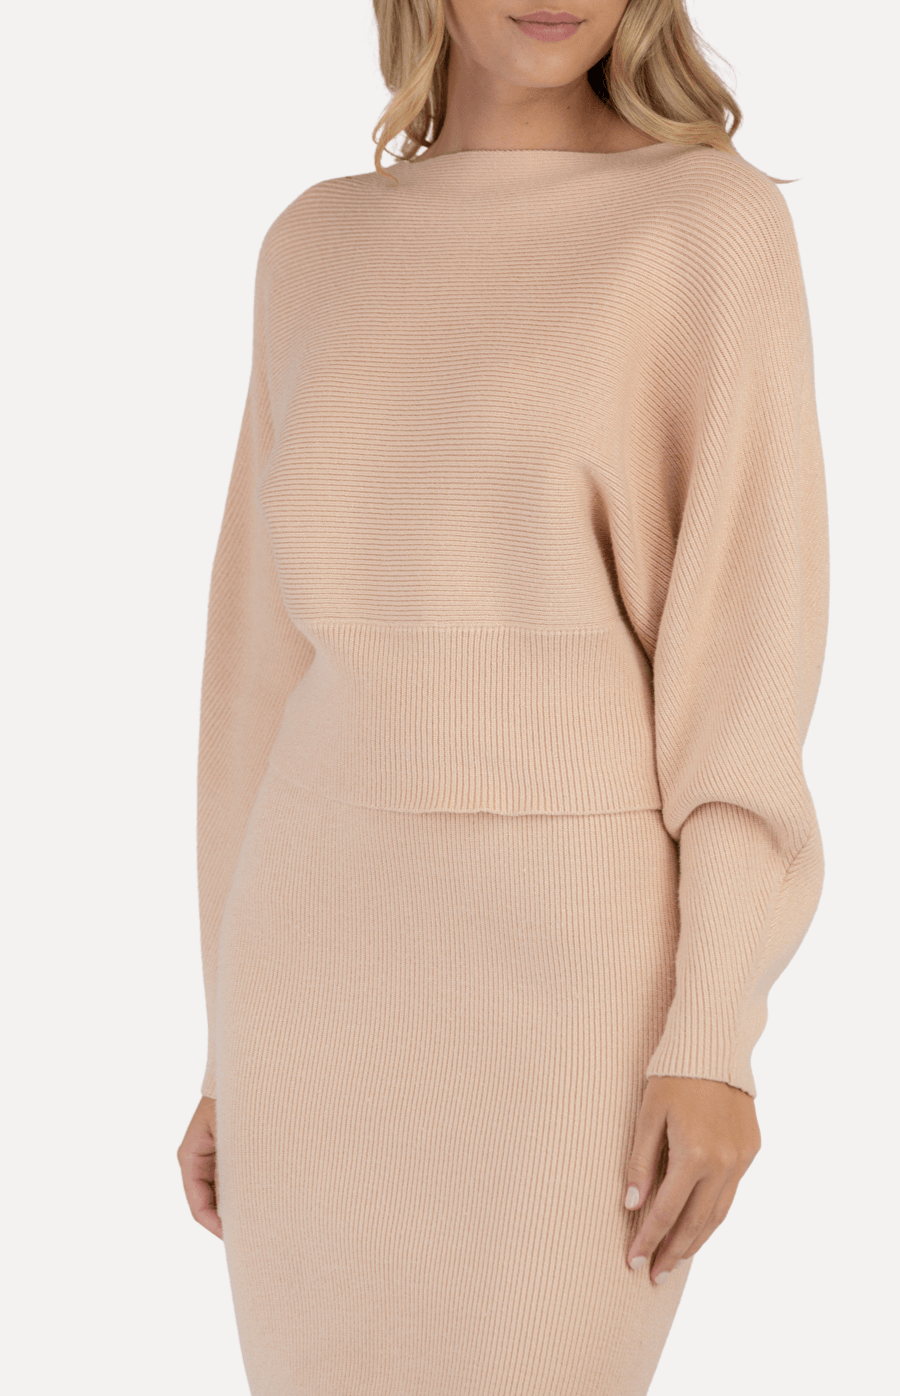 Lynae Knitted Top in Camel - Ophelia Fox Boutique